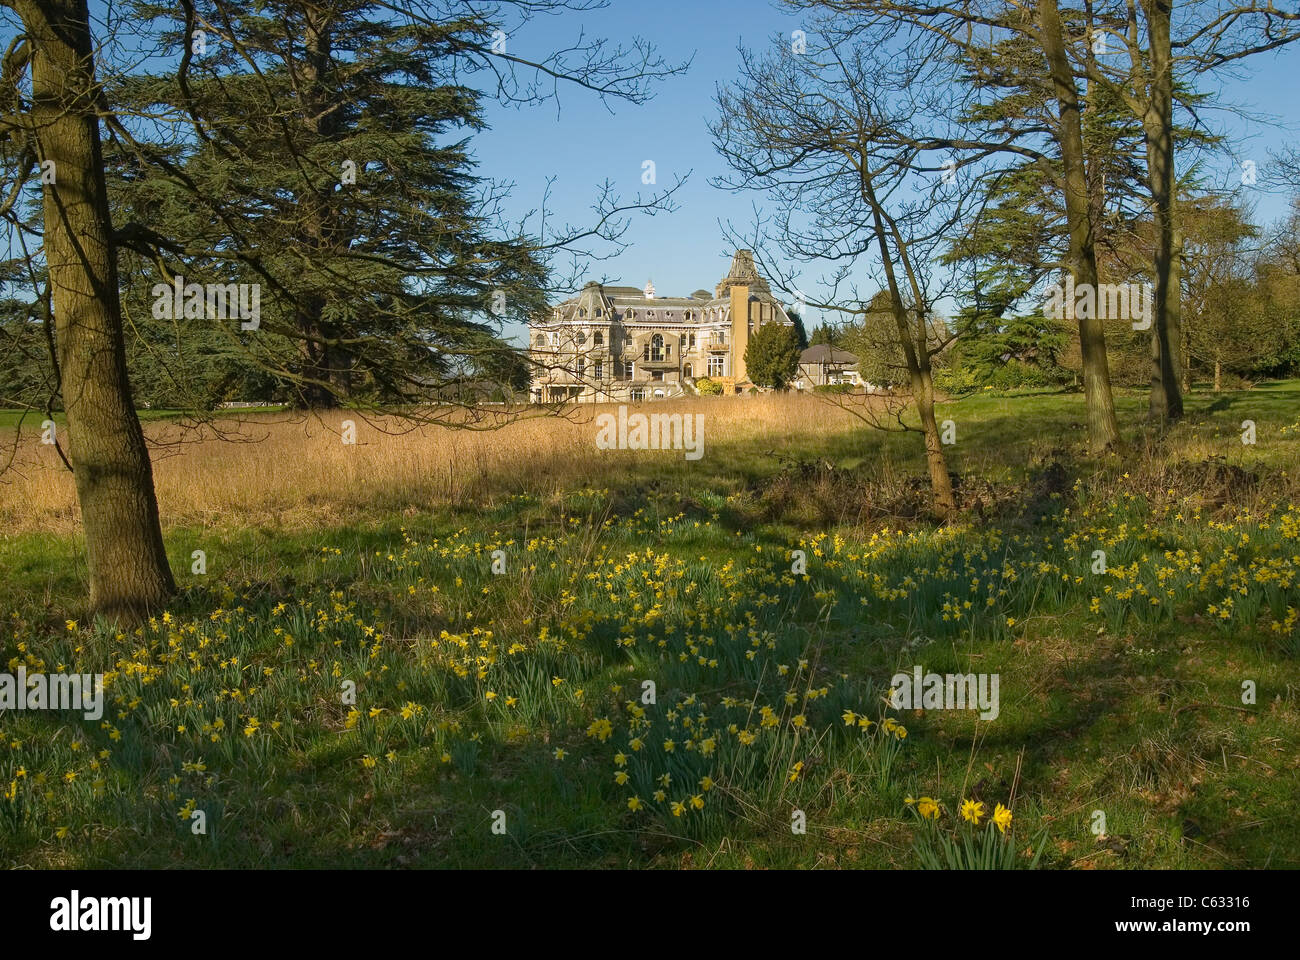 Park Place at Remenham near Henley in Berkshire set in parkland with daffodils in the foreground Stock Photo